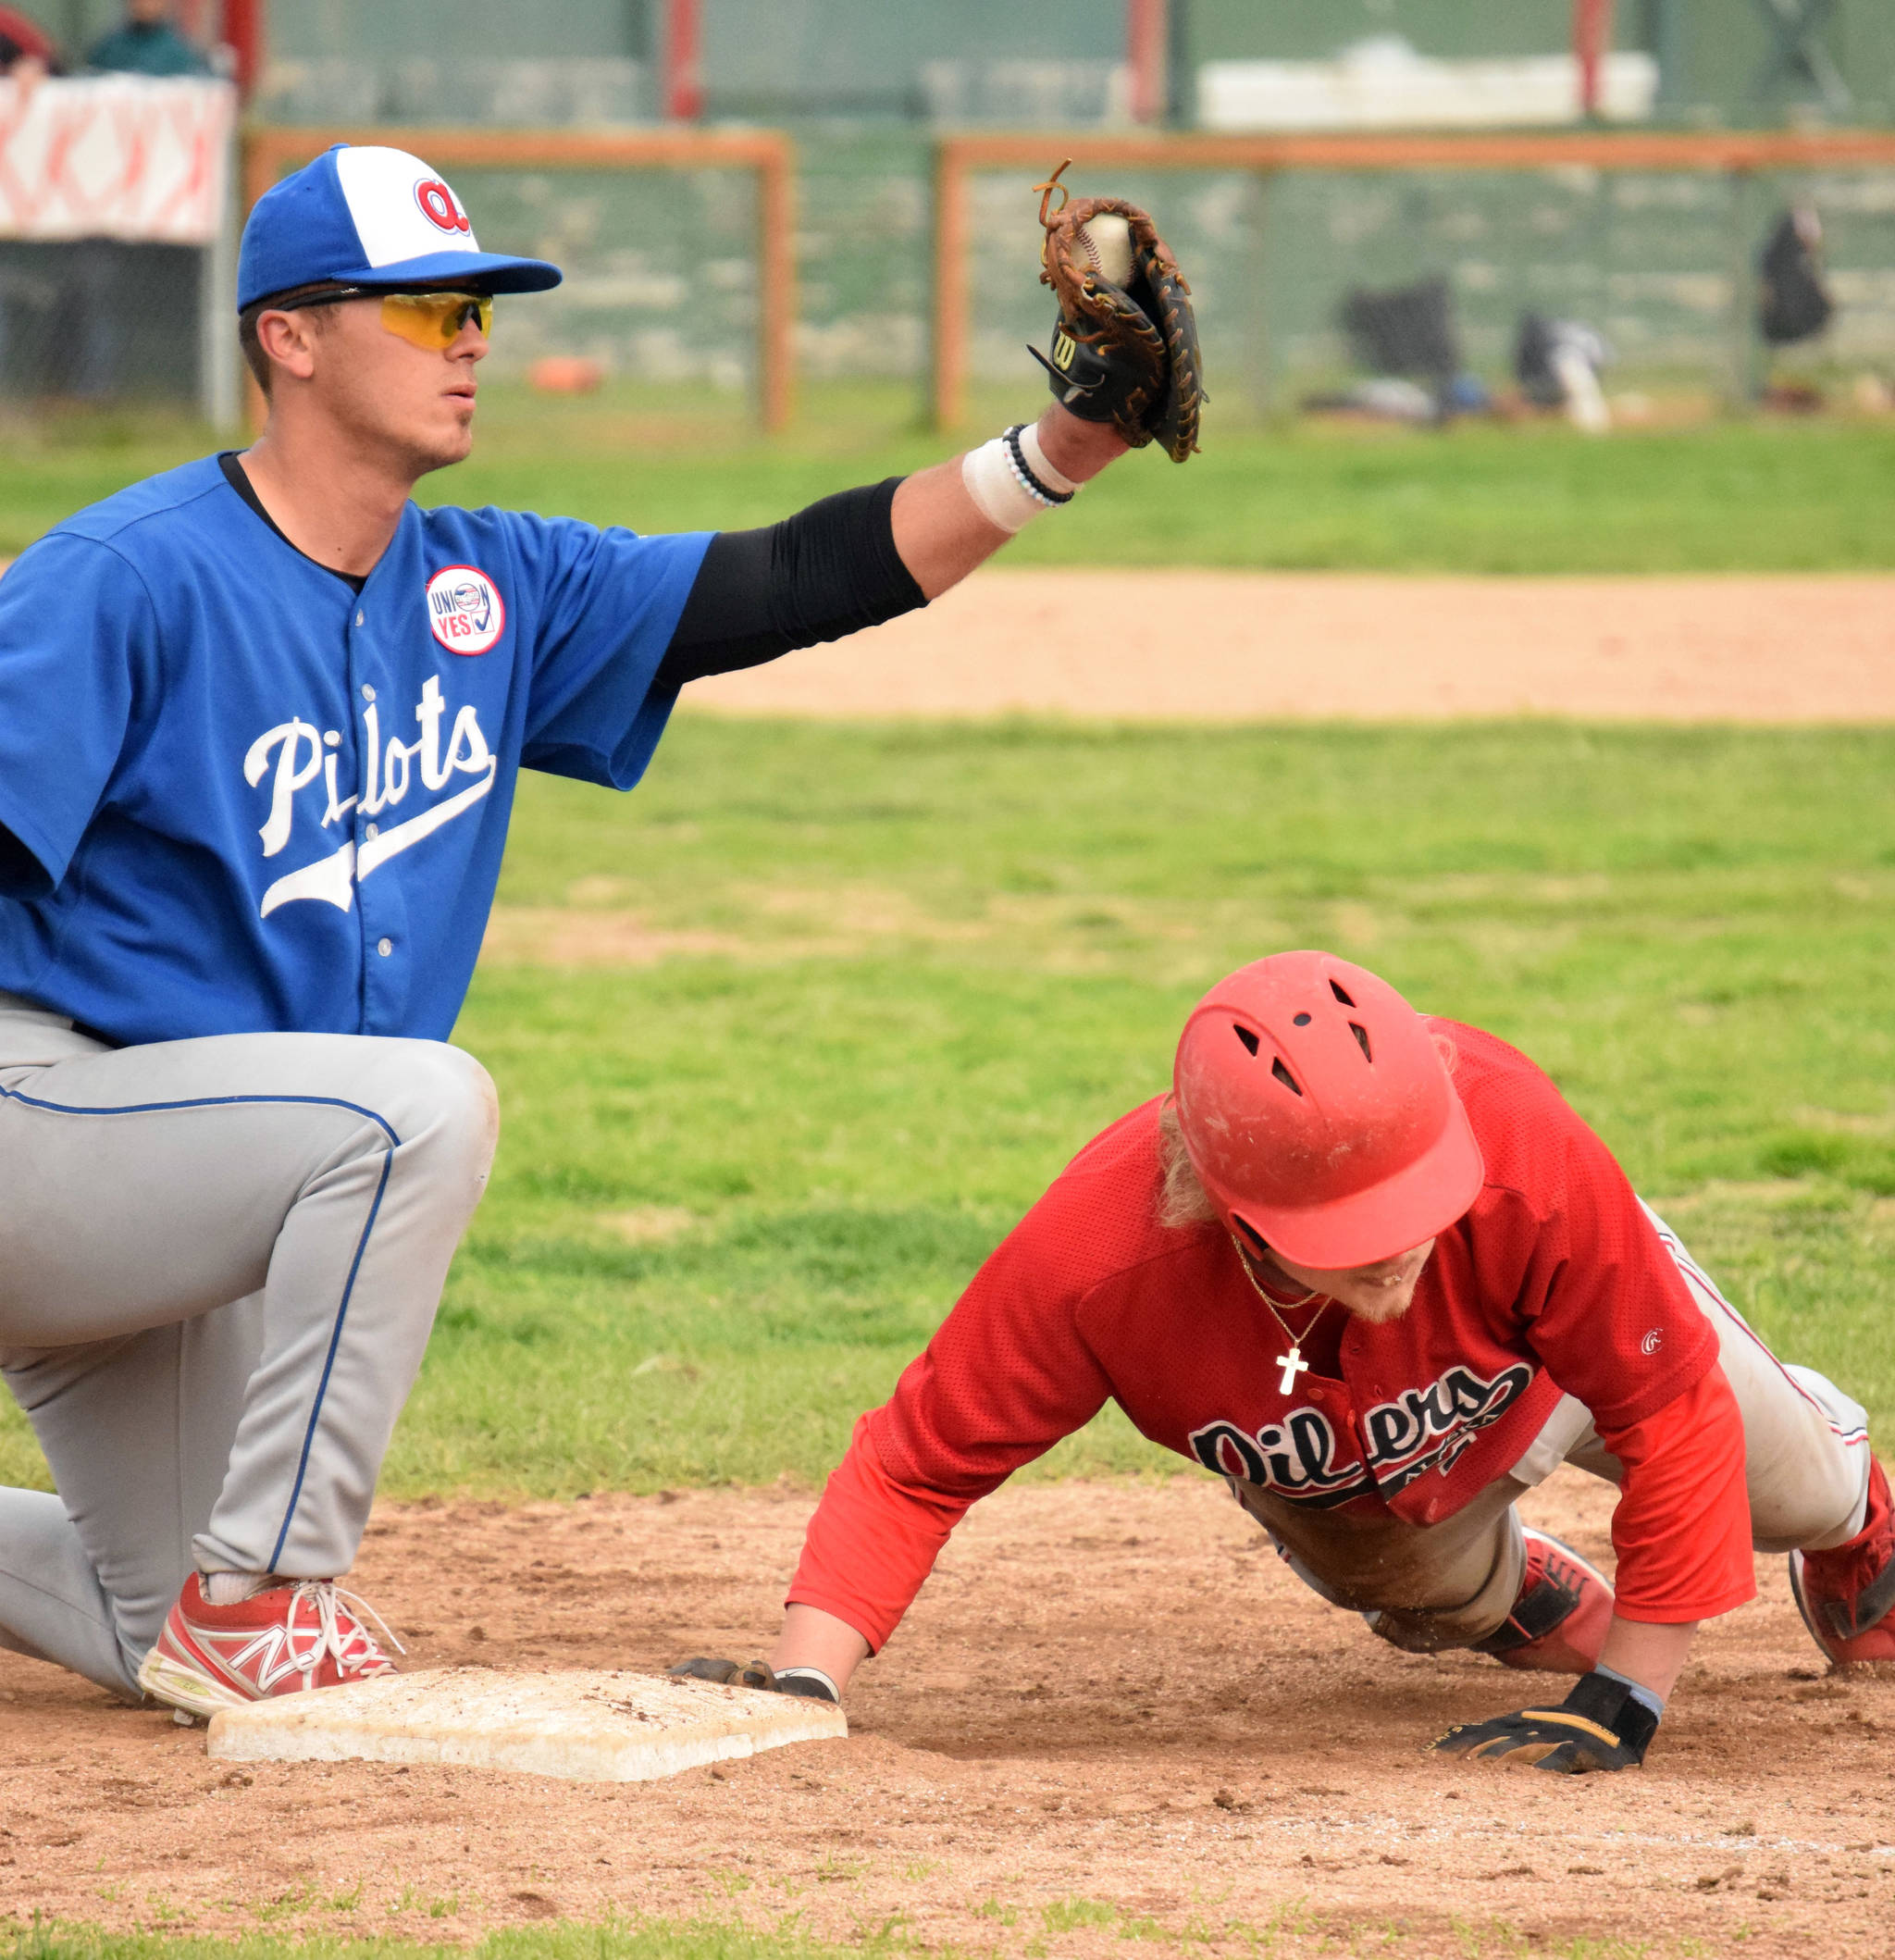 Cole Moore of the Peninsula Oilers dives into first base safely ahead of the tag of Anchorage Glacier Pilots first baseman CJ Breen on Friday, July 23, 2021, at Coral Seymour Memorial Park in Kenai, Alaska. (Photo by Jeff Helminiak/Peninsula Clarion)